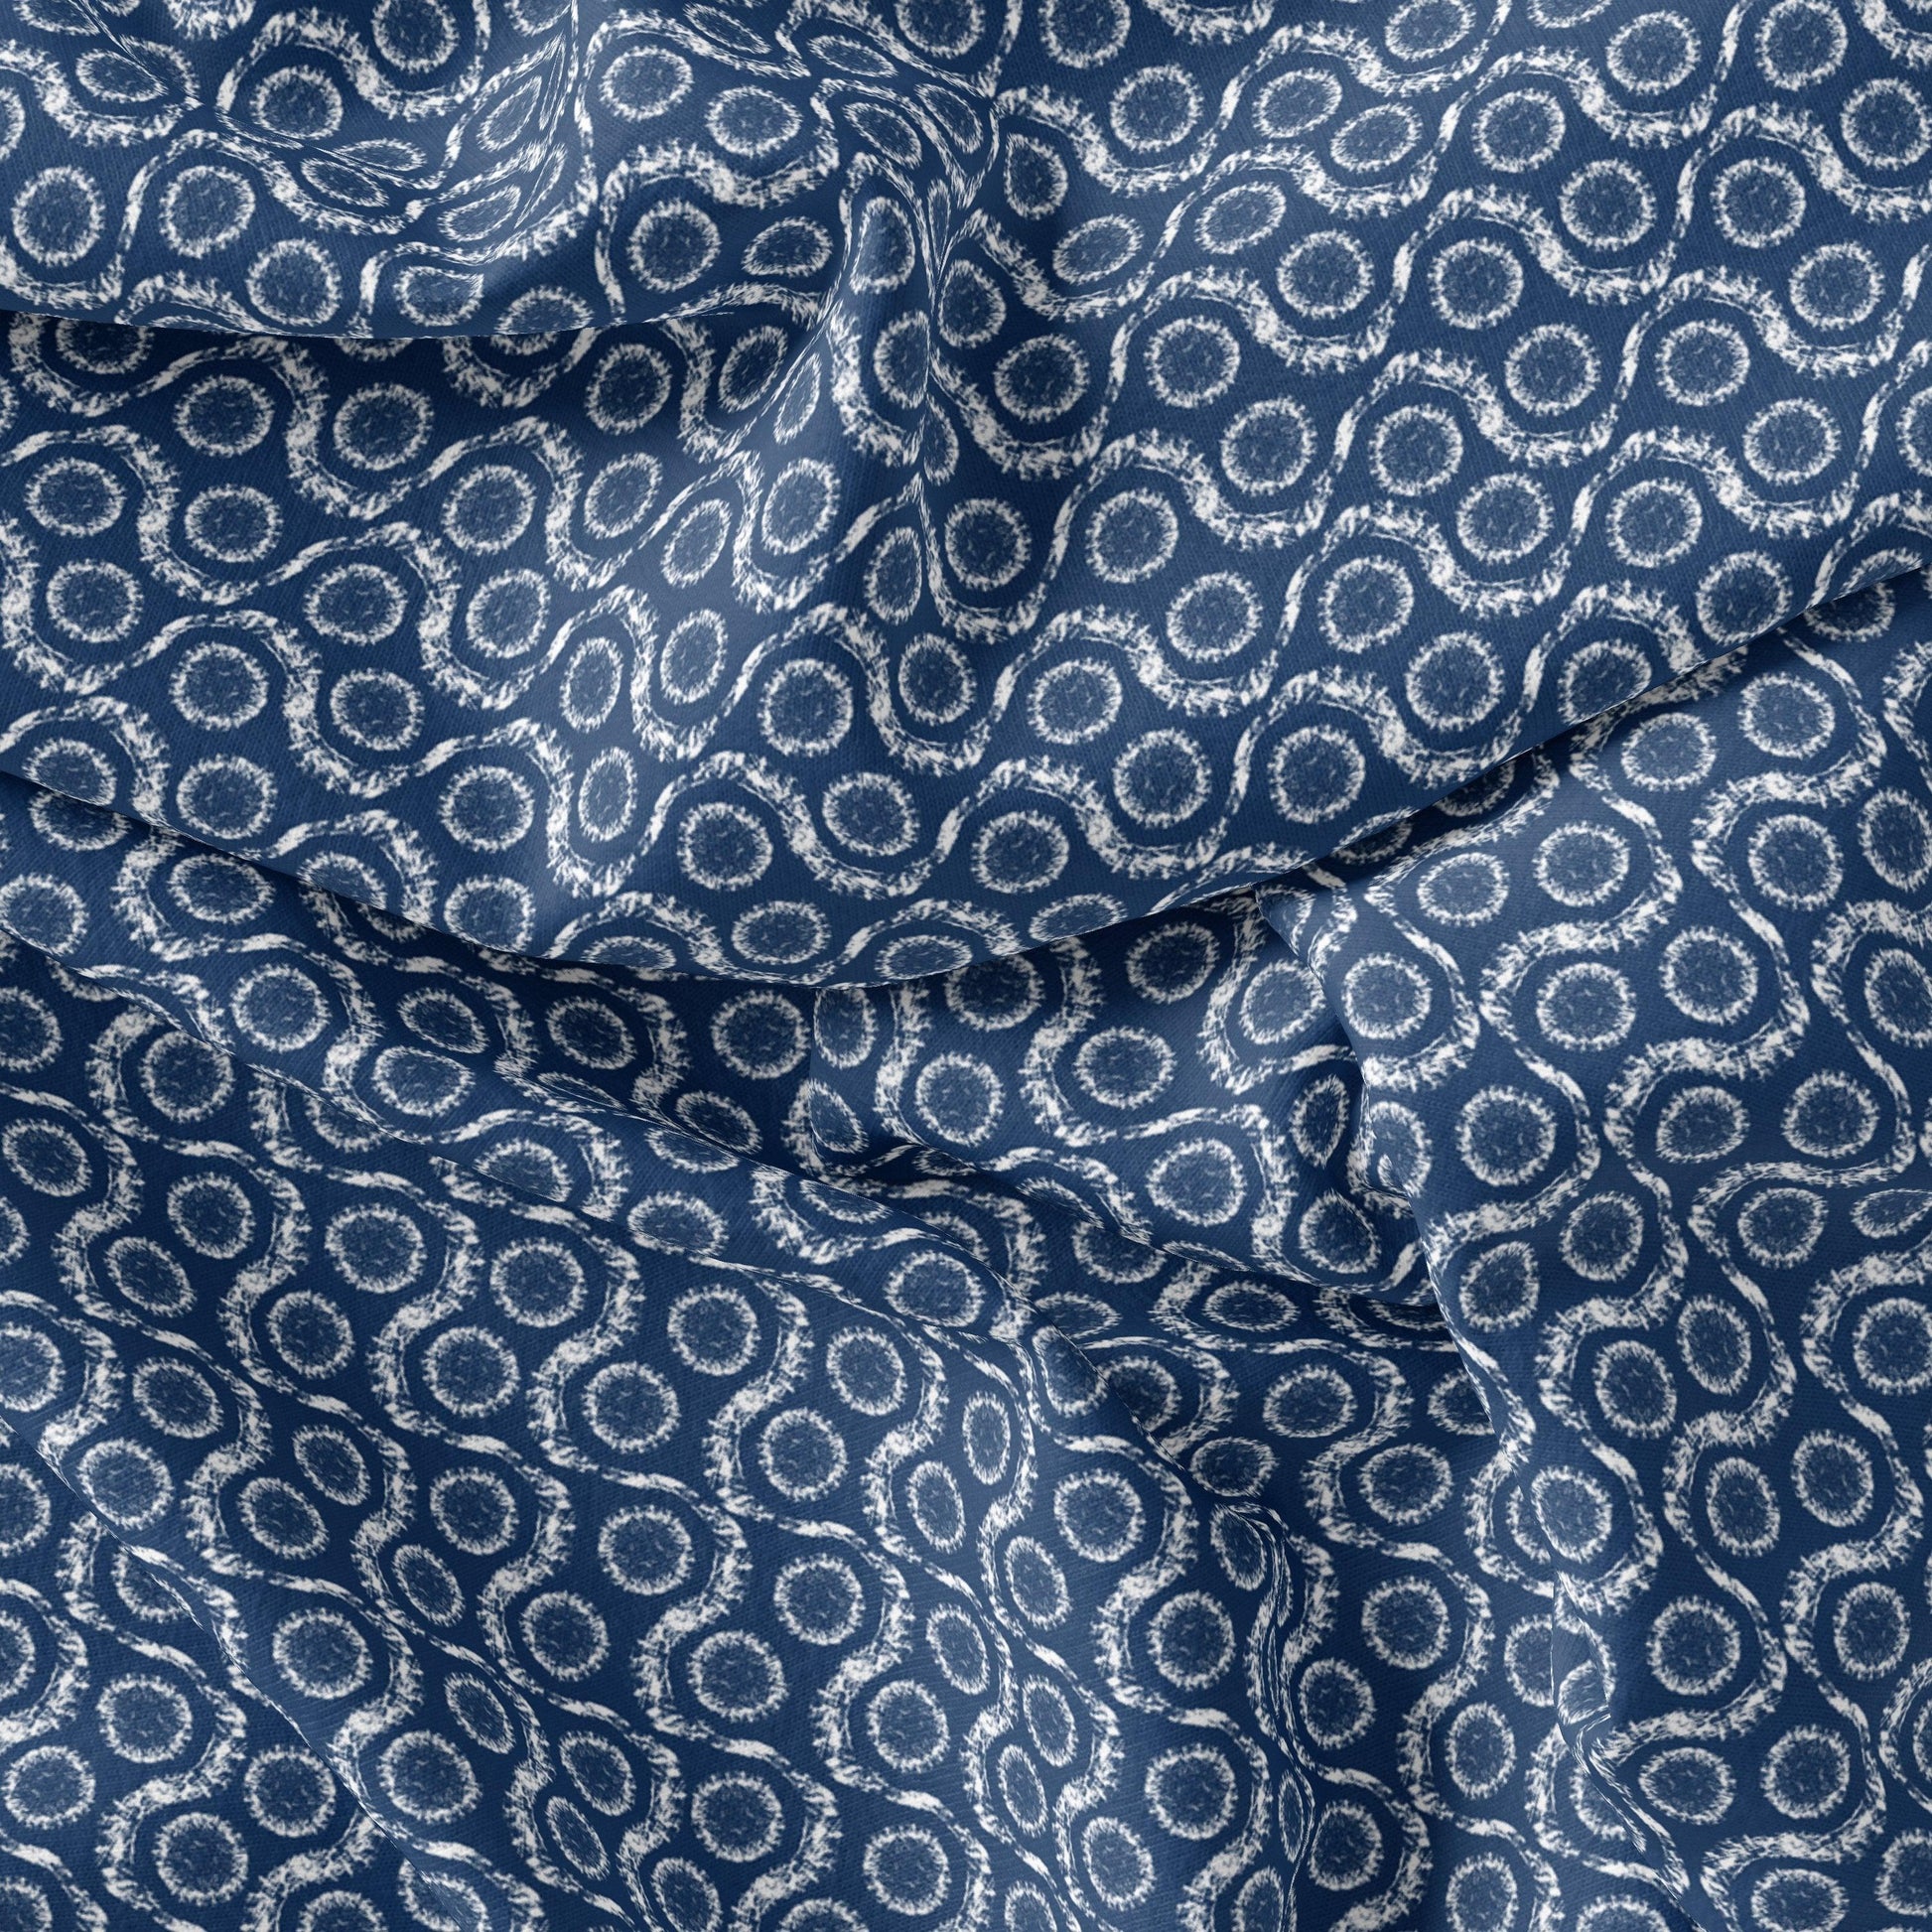 Seamless Vermicular Pattern With Blue Colour Digital Printed Fabric - Tusser Silk - FAB VOGUE Studio®